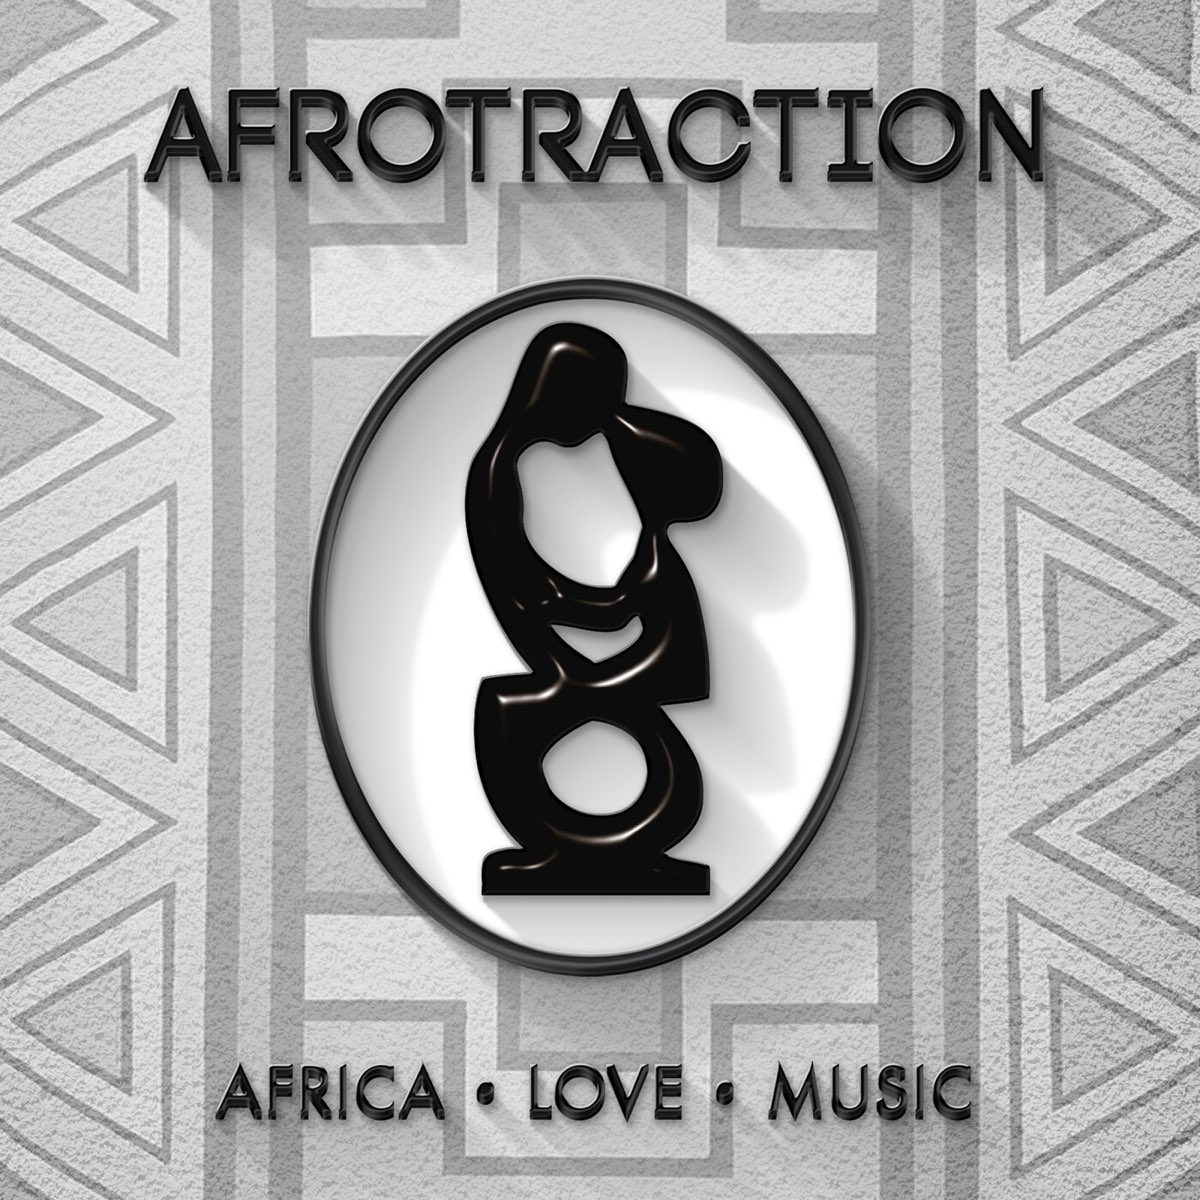 ‎Africa. Love. Music Album by Afrotraction Apple Music